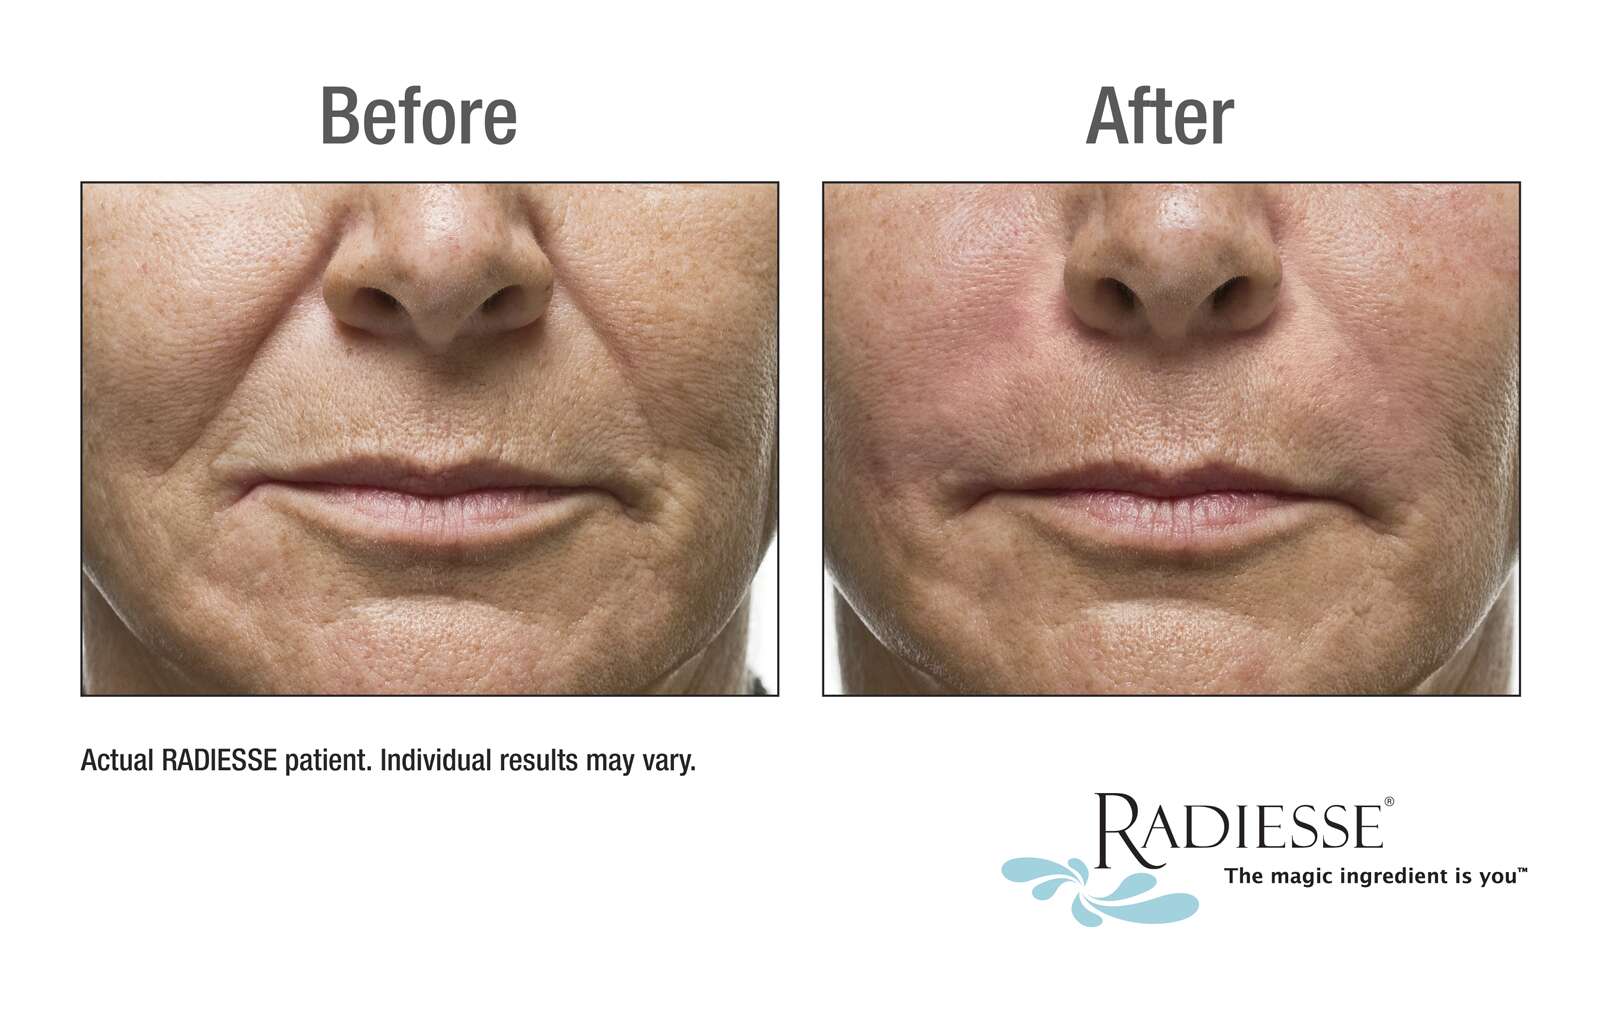 Radiesse – A More Youthful Appearance